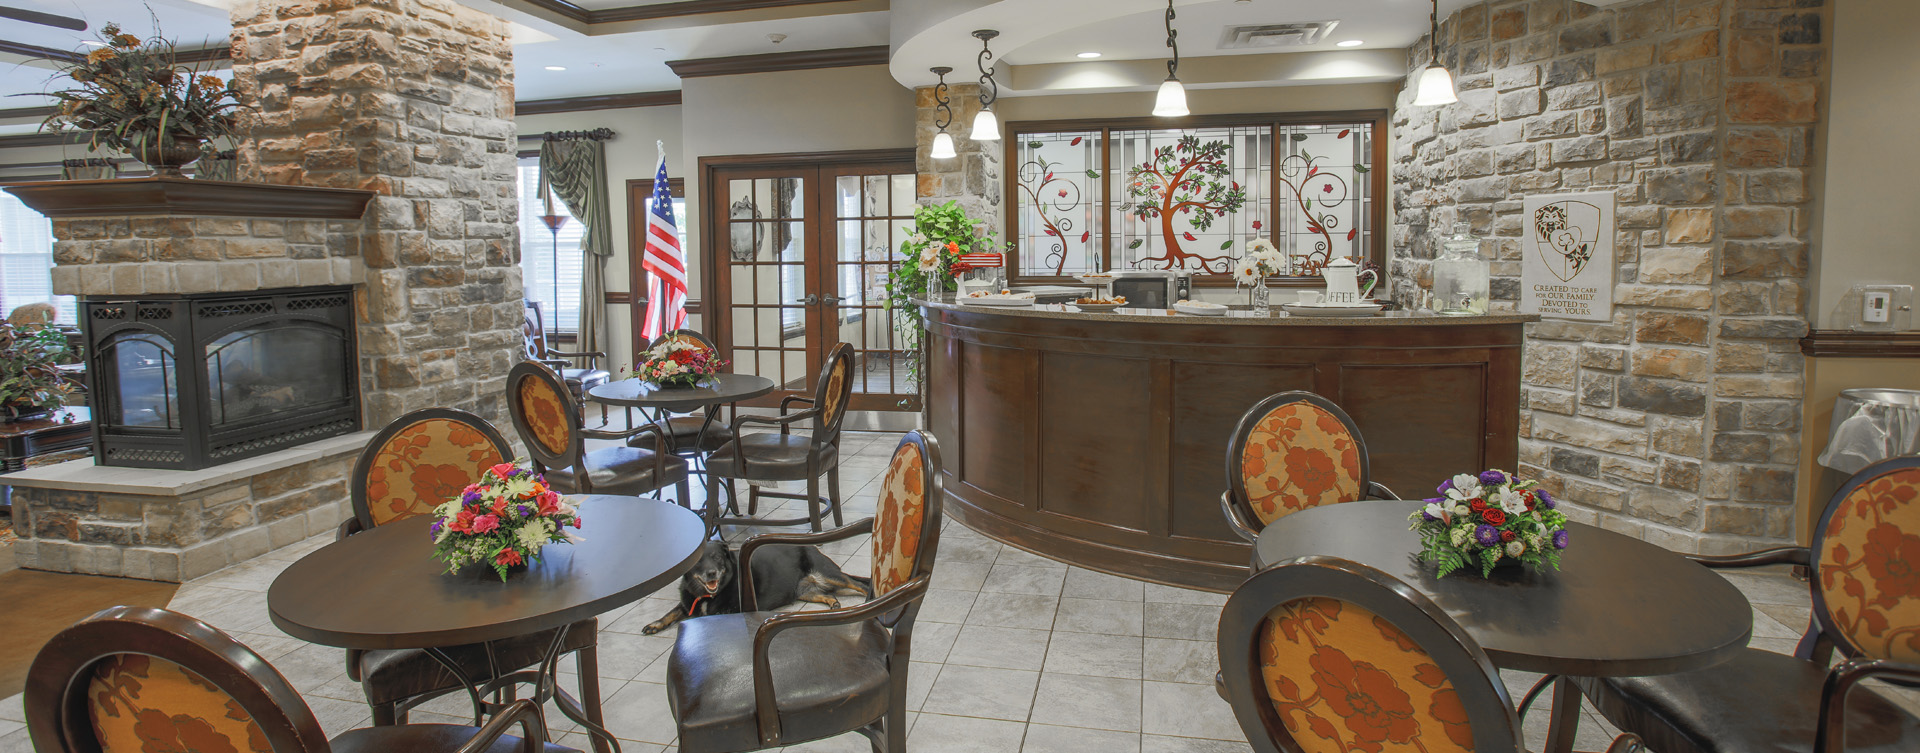 Mingle and converse with old and new friends alike in the bistro at Bickford of Carmel